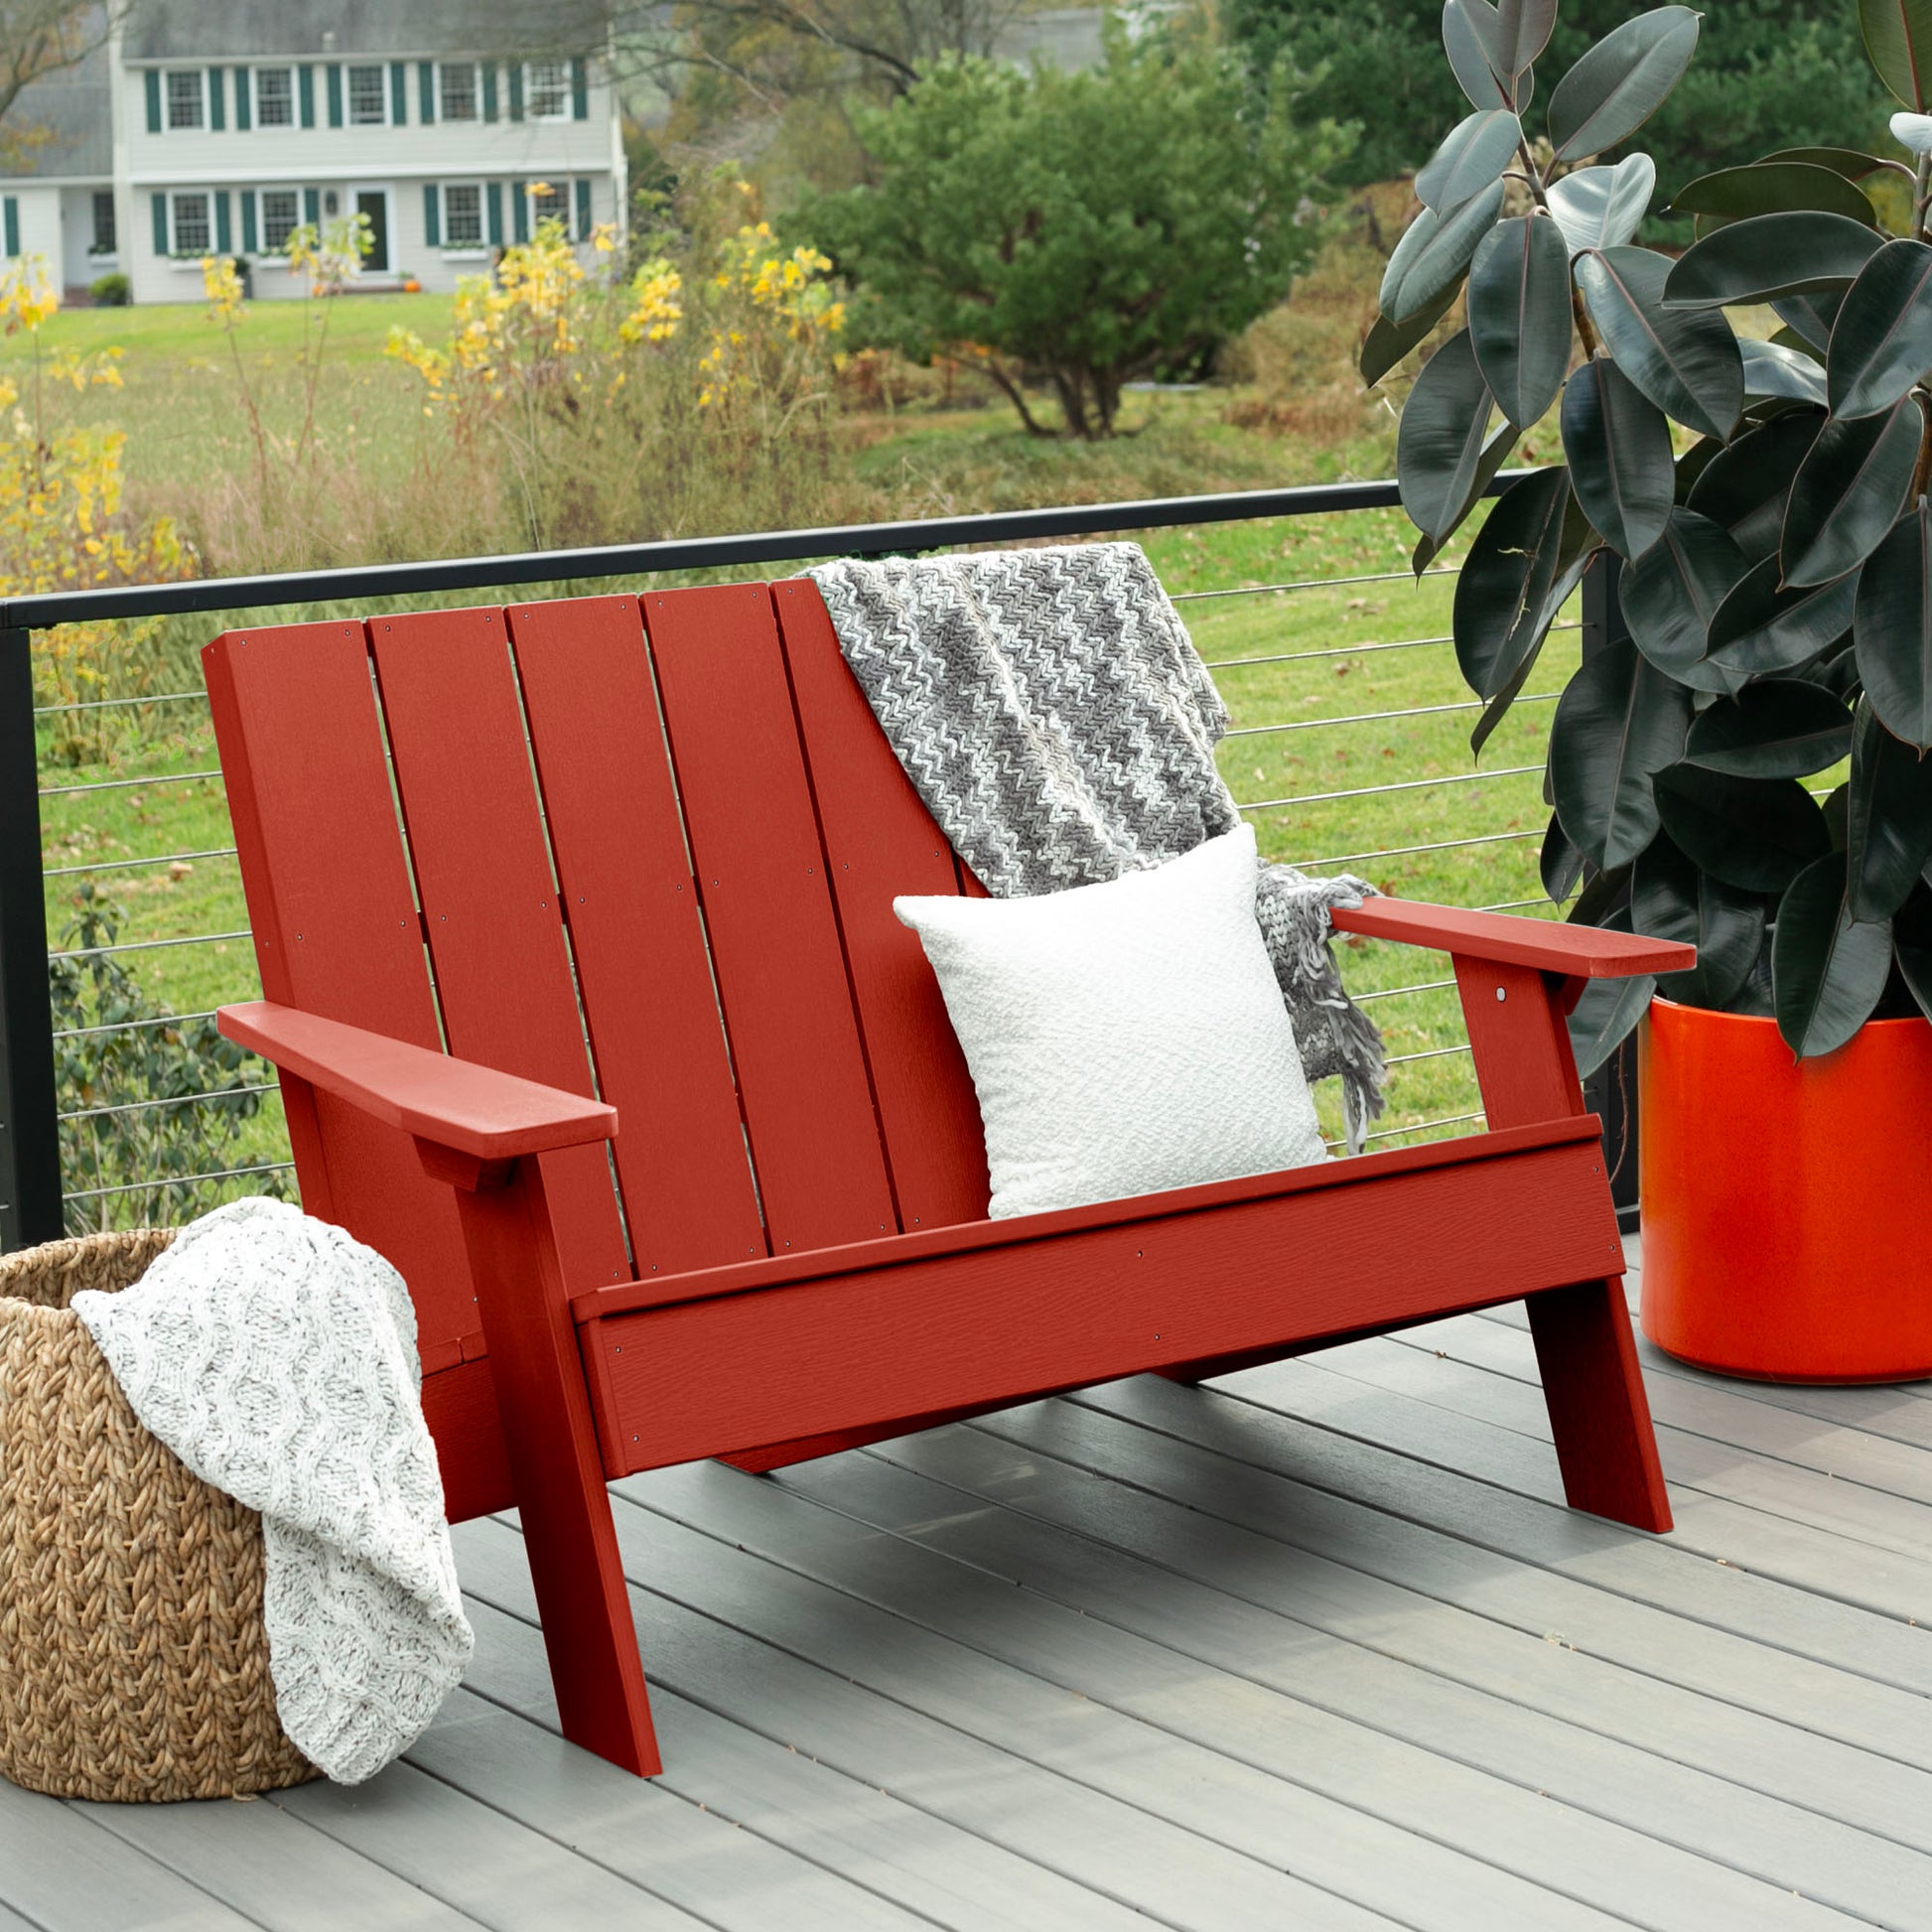 Red Granite Hills double wide Adirondack chair with blankets and pillow